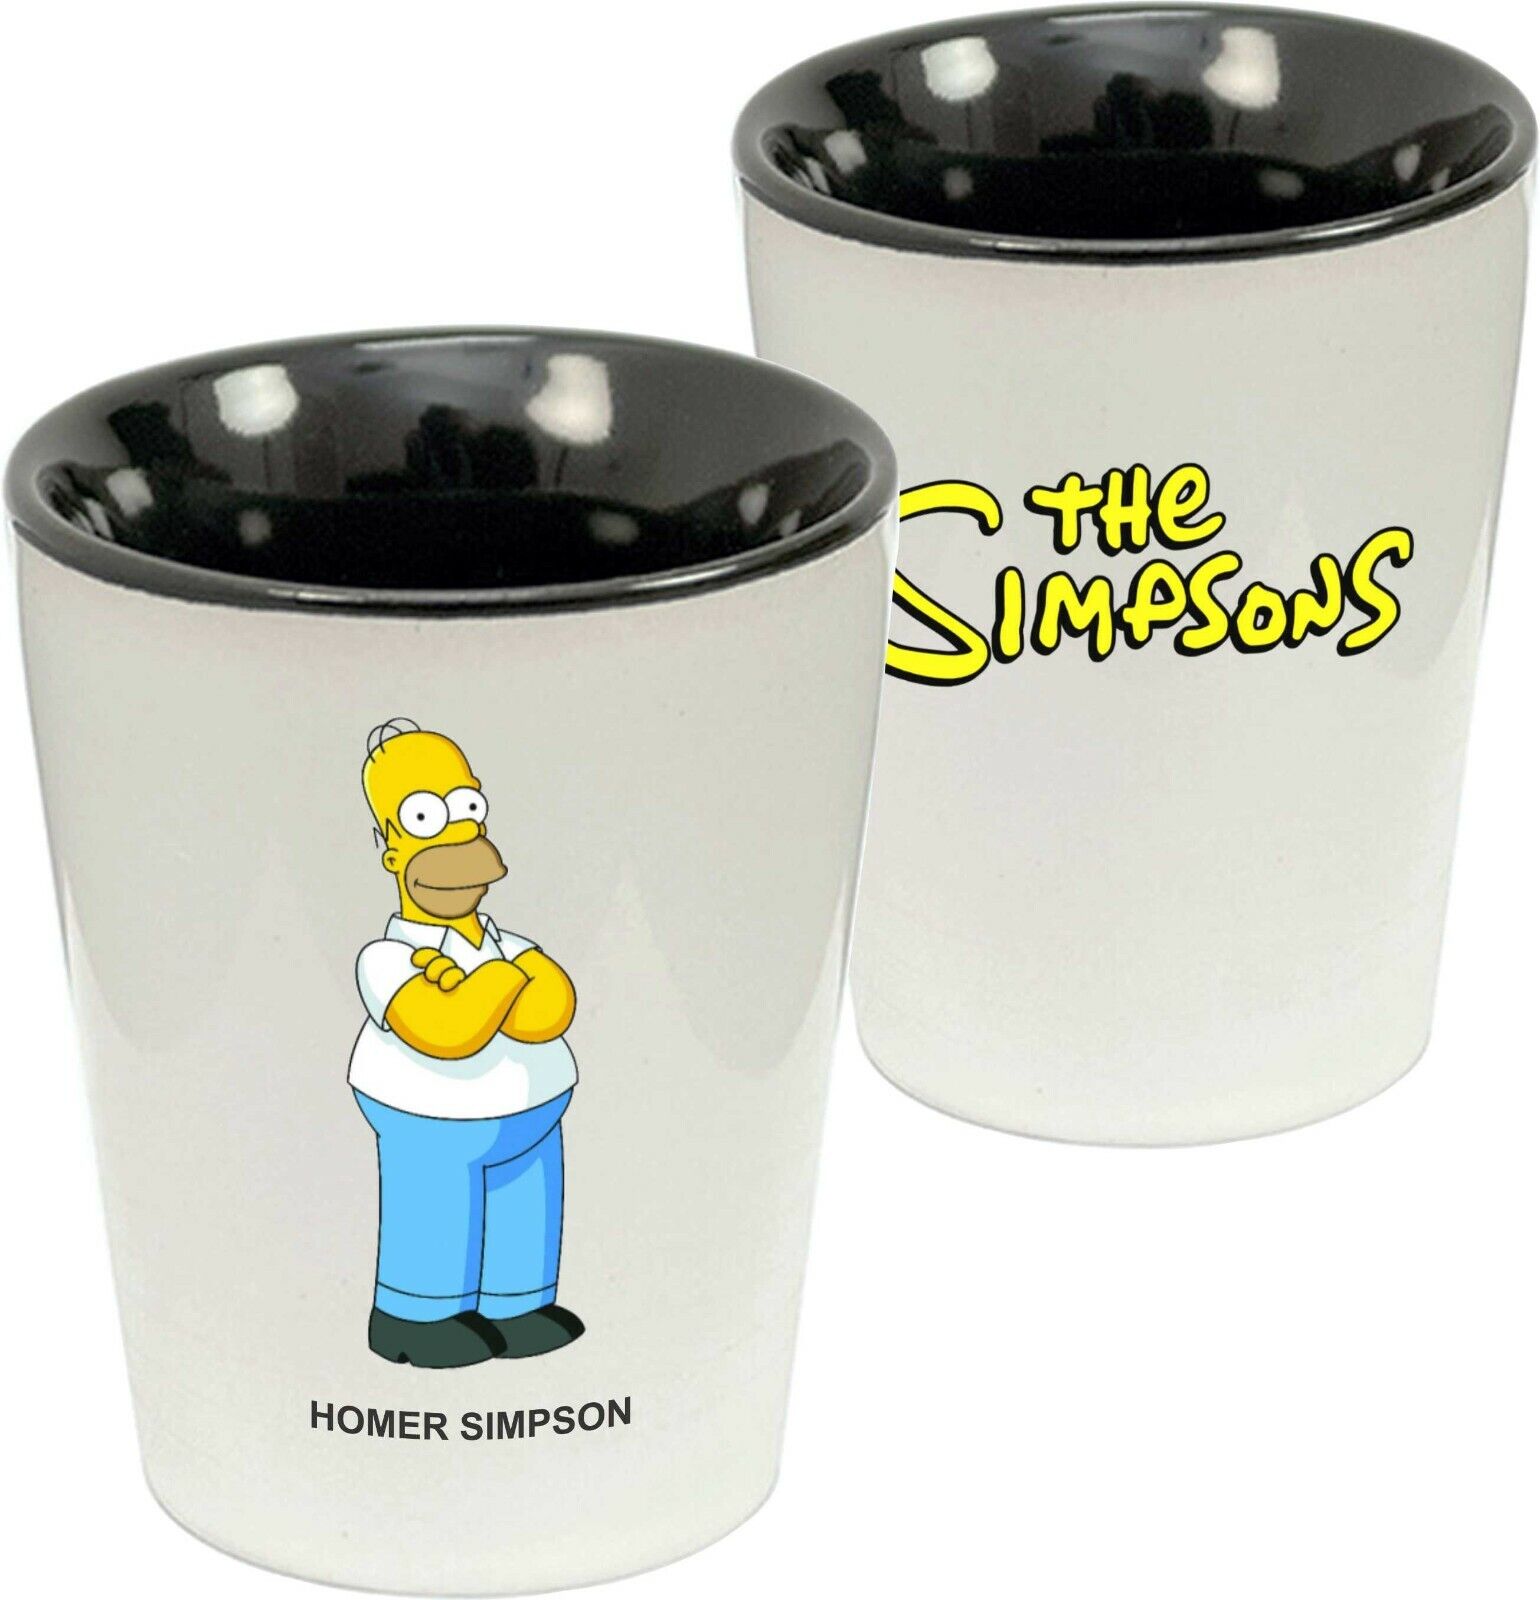 The Simpson's Character Shot Glass Collection